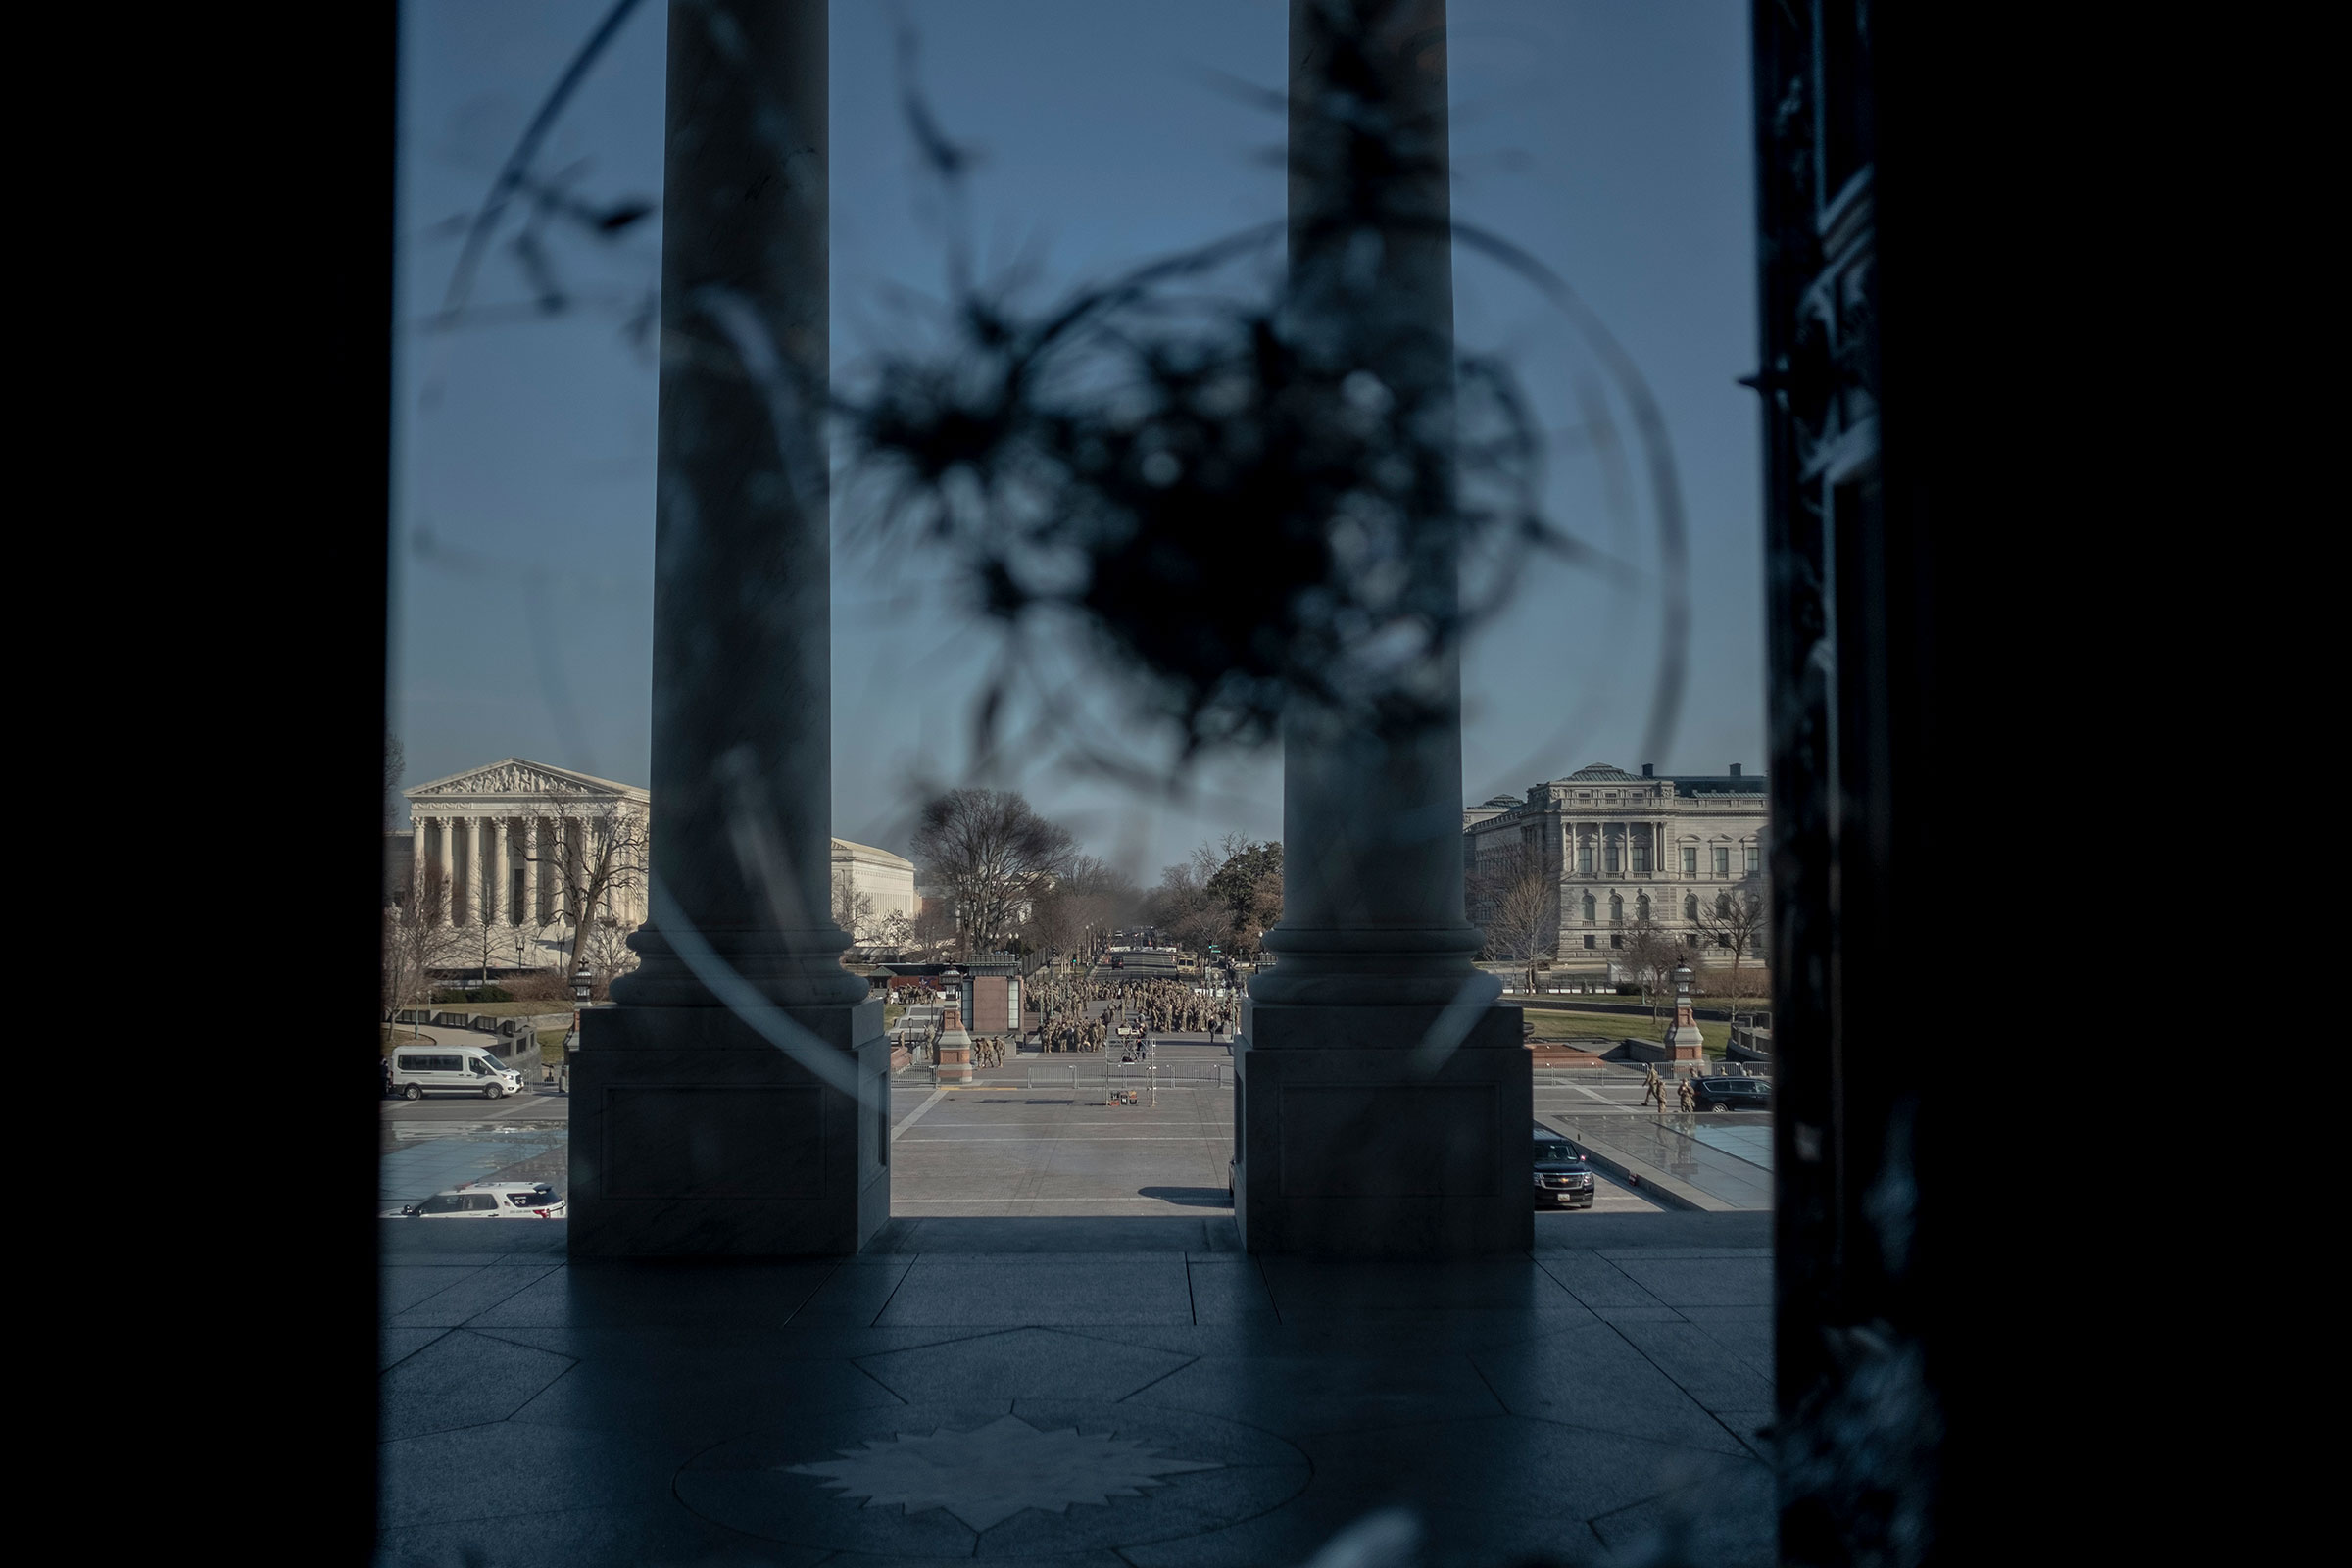 The East Front of the Capitol, which was damaged during the insurrection the week prior, in Washington, on Jan.13, 2020.